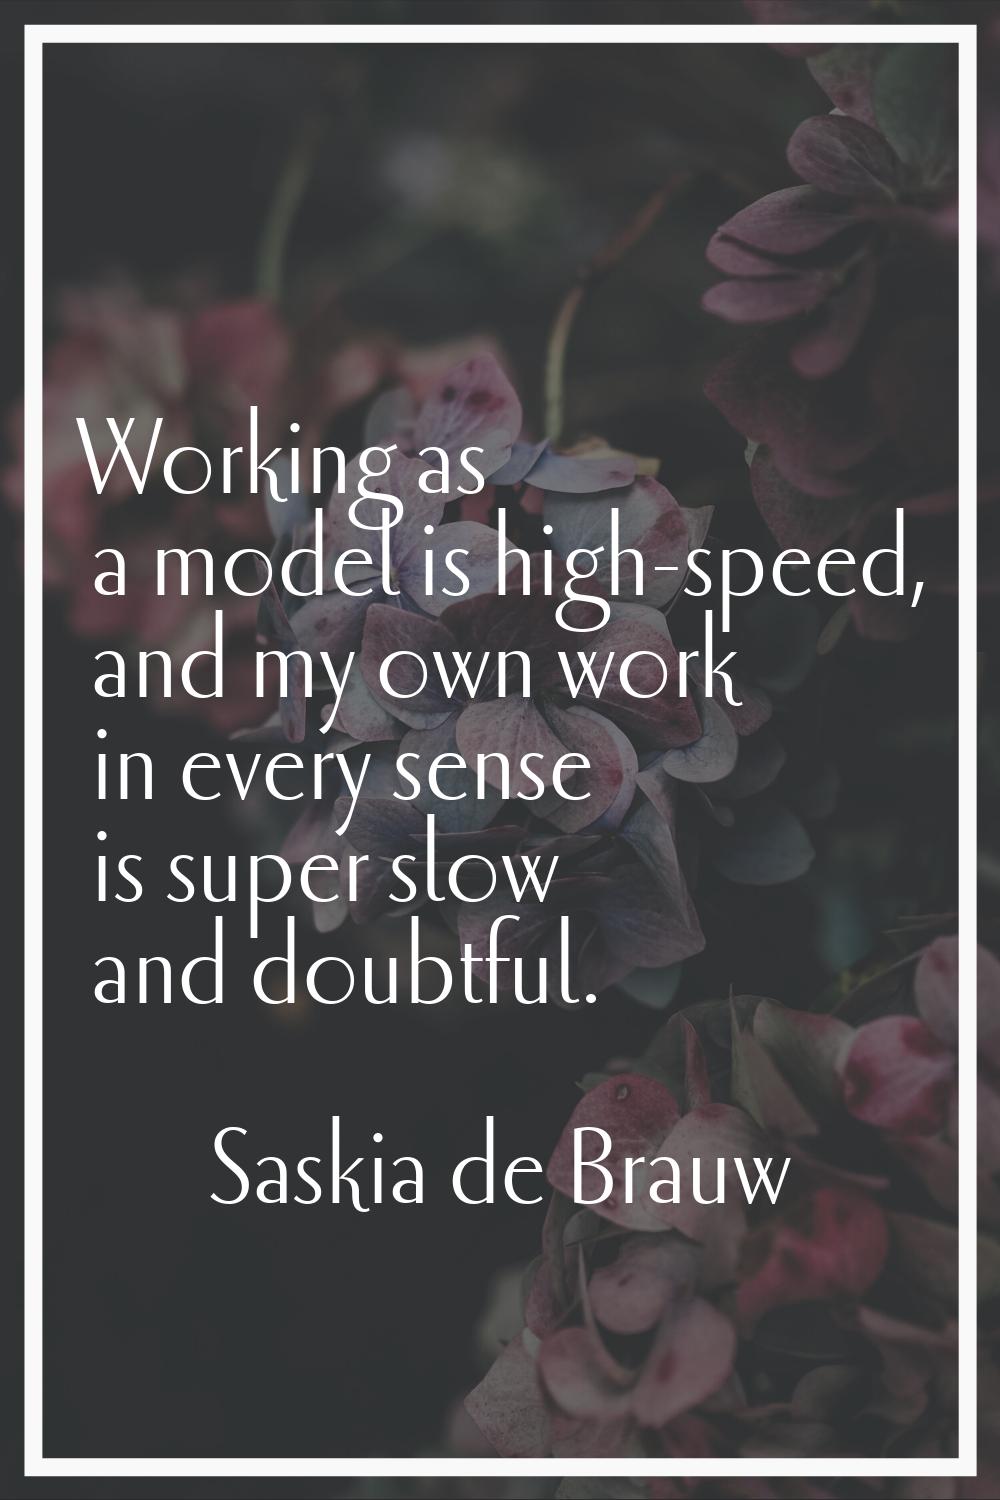 Working as a model is high-speed, and my own work in every sense is super slow and doubtful.